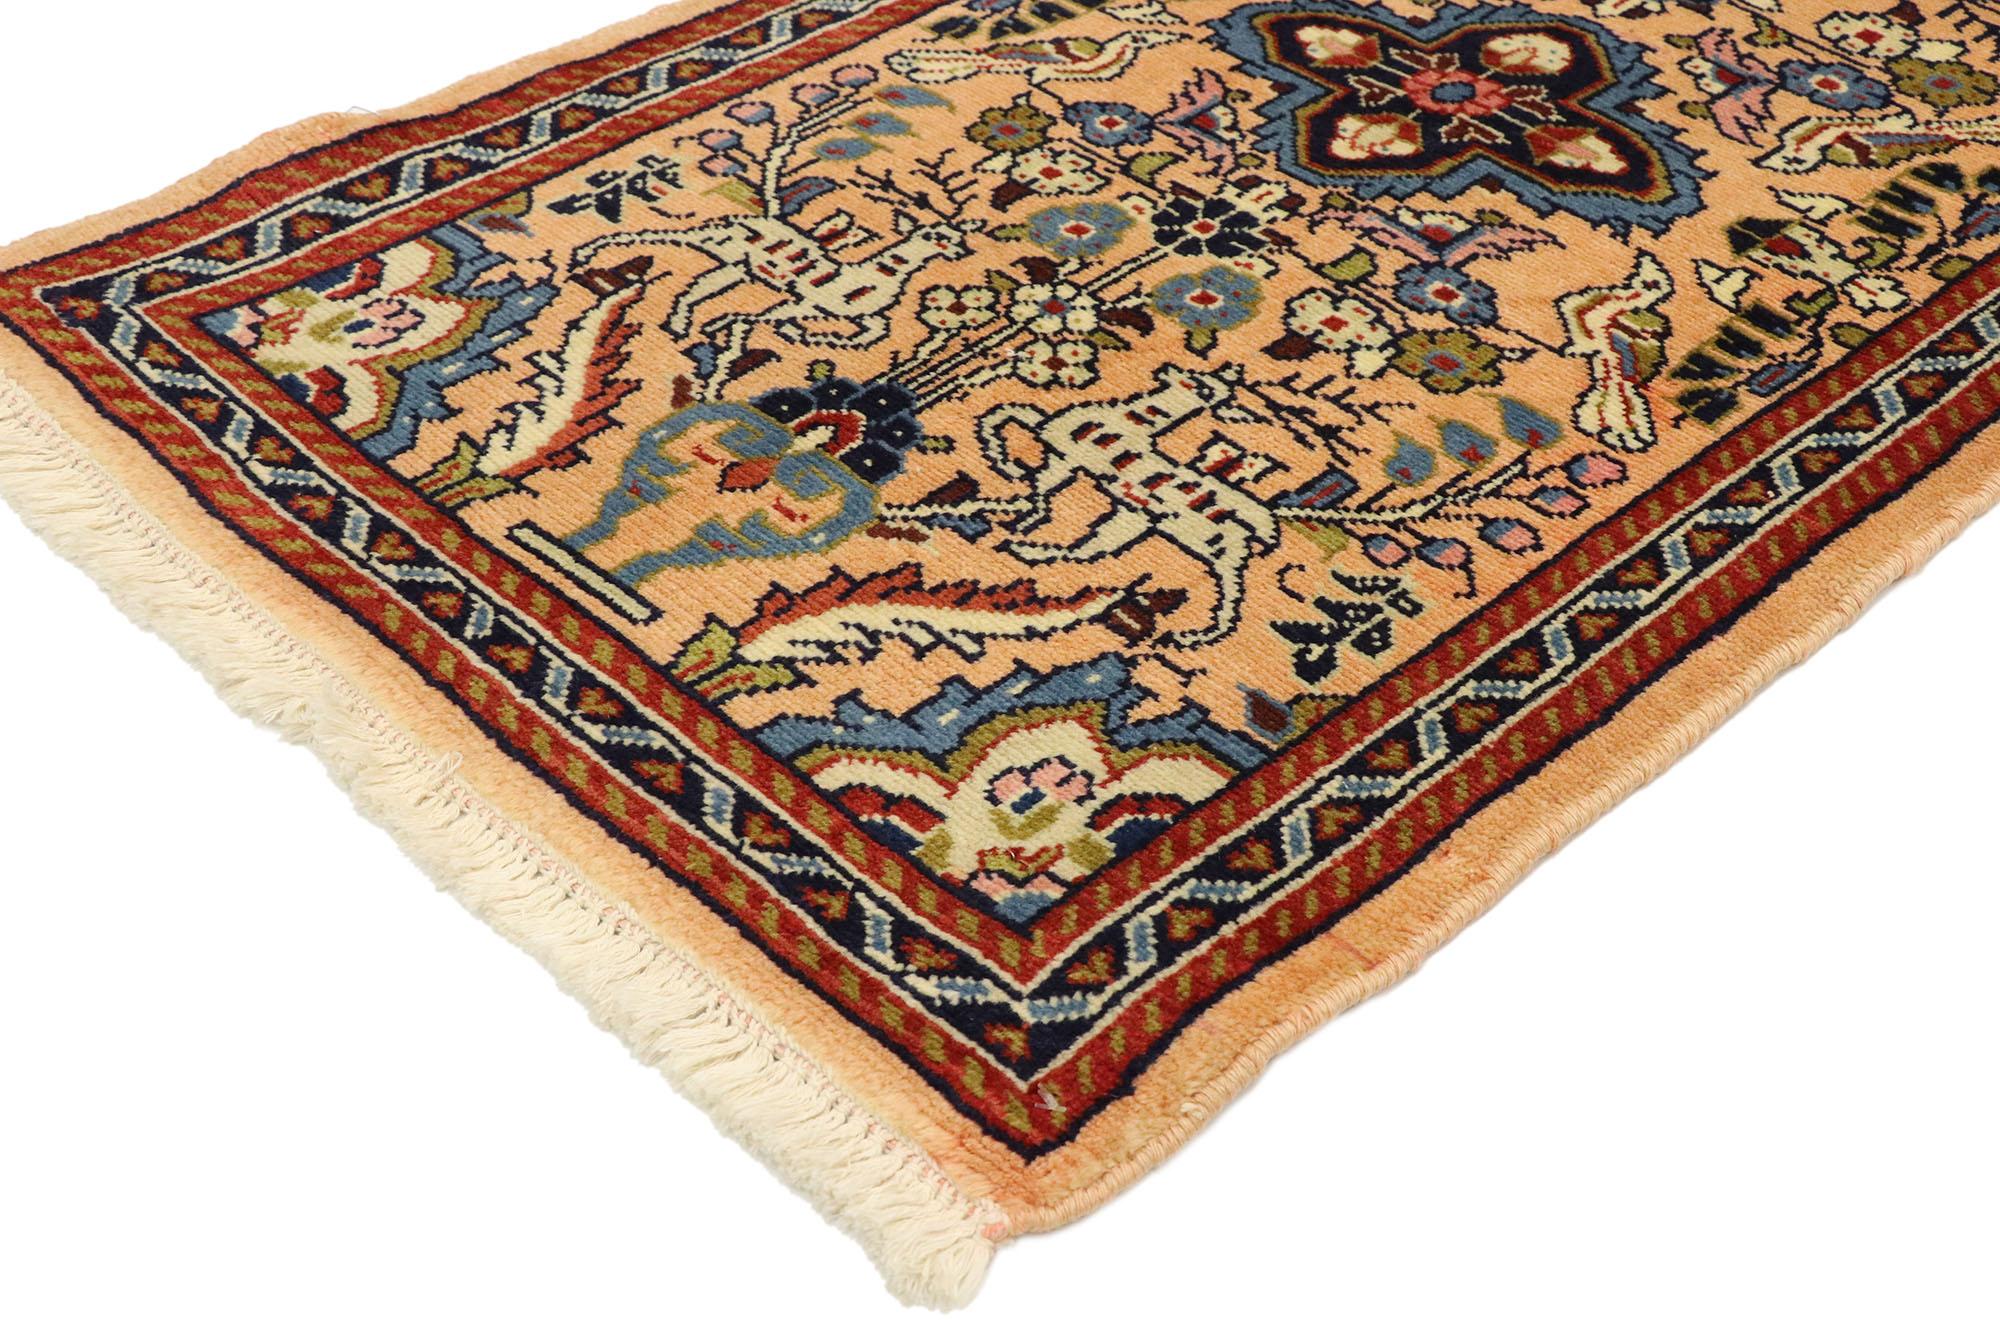 76070 vintage Persian Mehraban vase rug with French Baroque style. Sure to captivate the most discerning aesthete, this hand knotted wool vintage Persian Sarouk rug is the epitome of French Baroque Victorian style in one. A stunning testament to